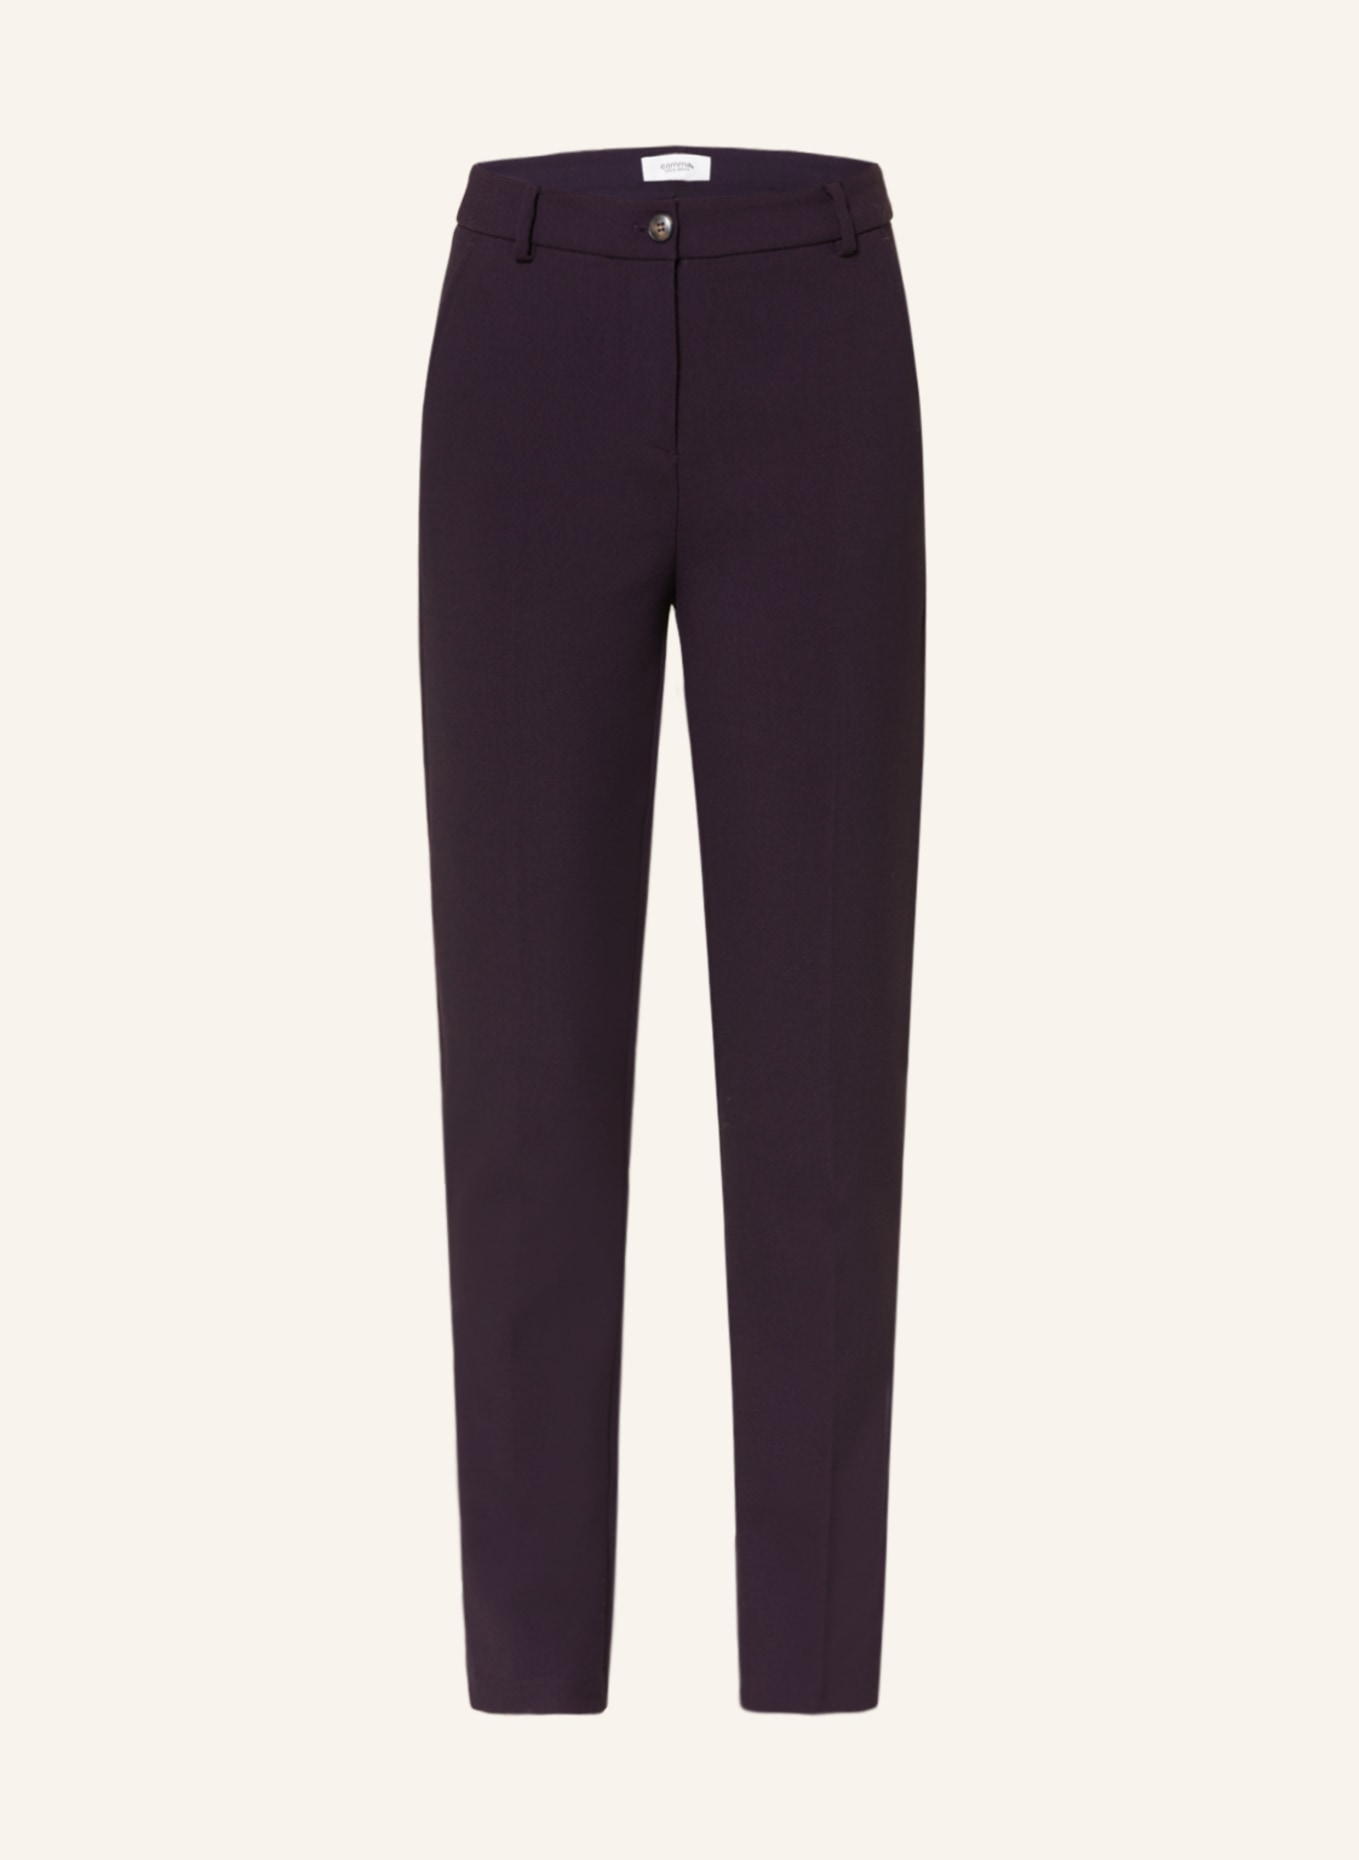 Buy SELECTED Blue Woollen Smart Casual Trousers - Trousers for Men 1428801  | Myntra